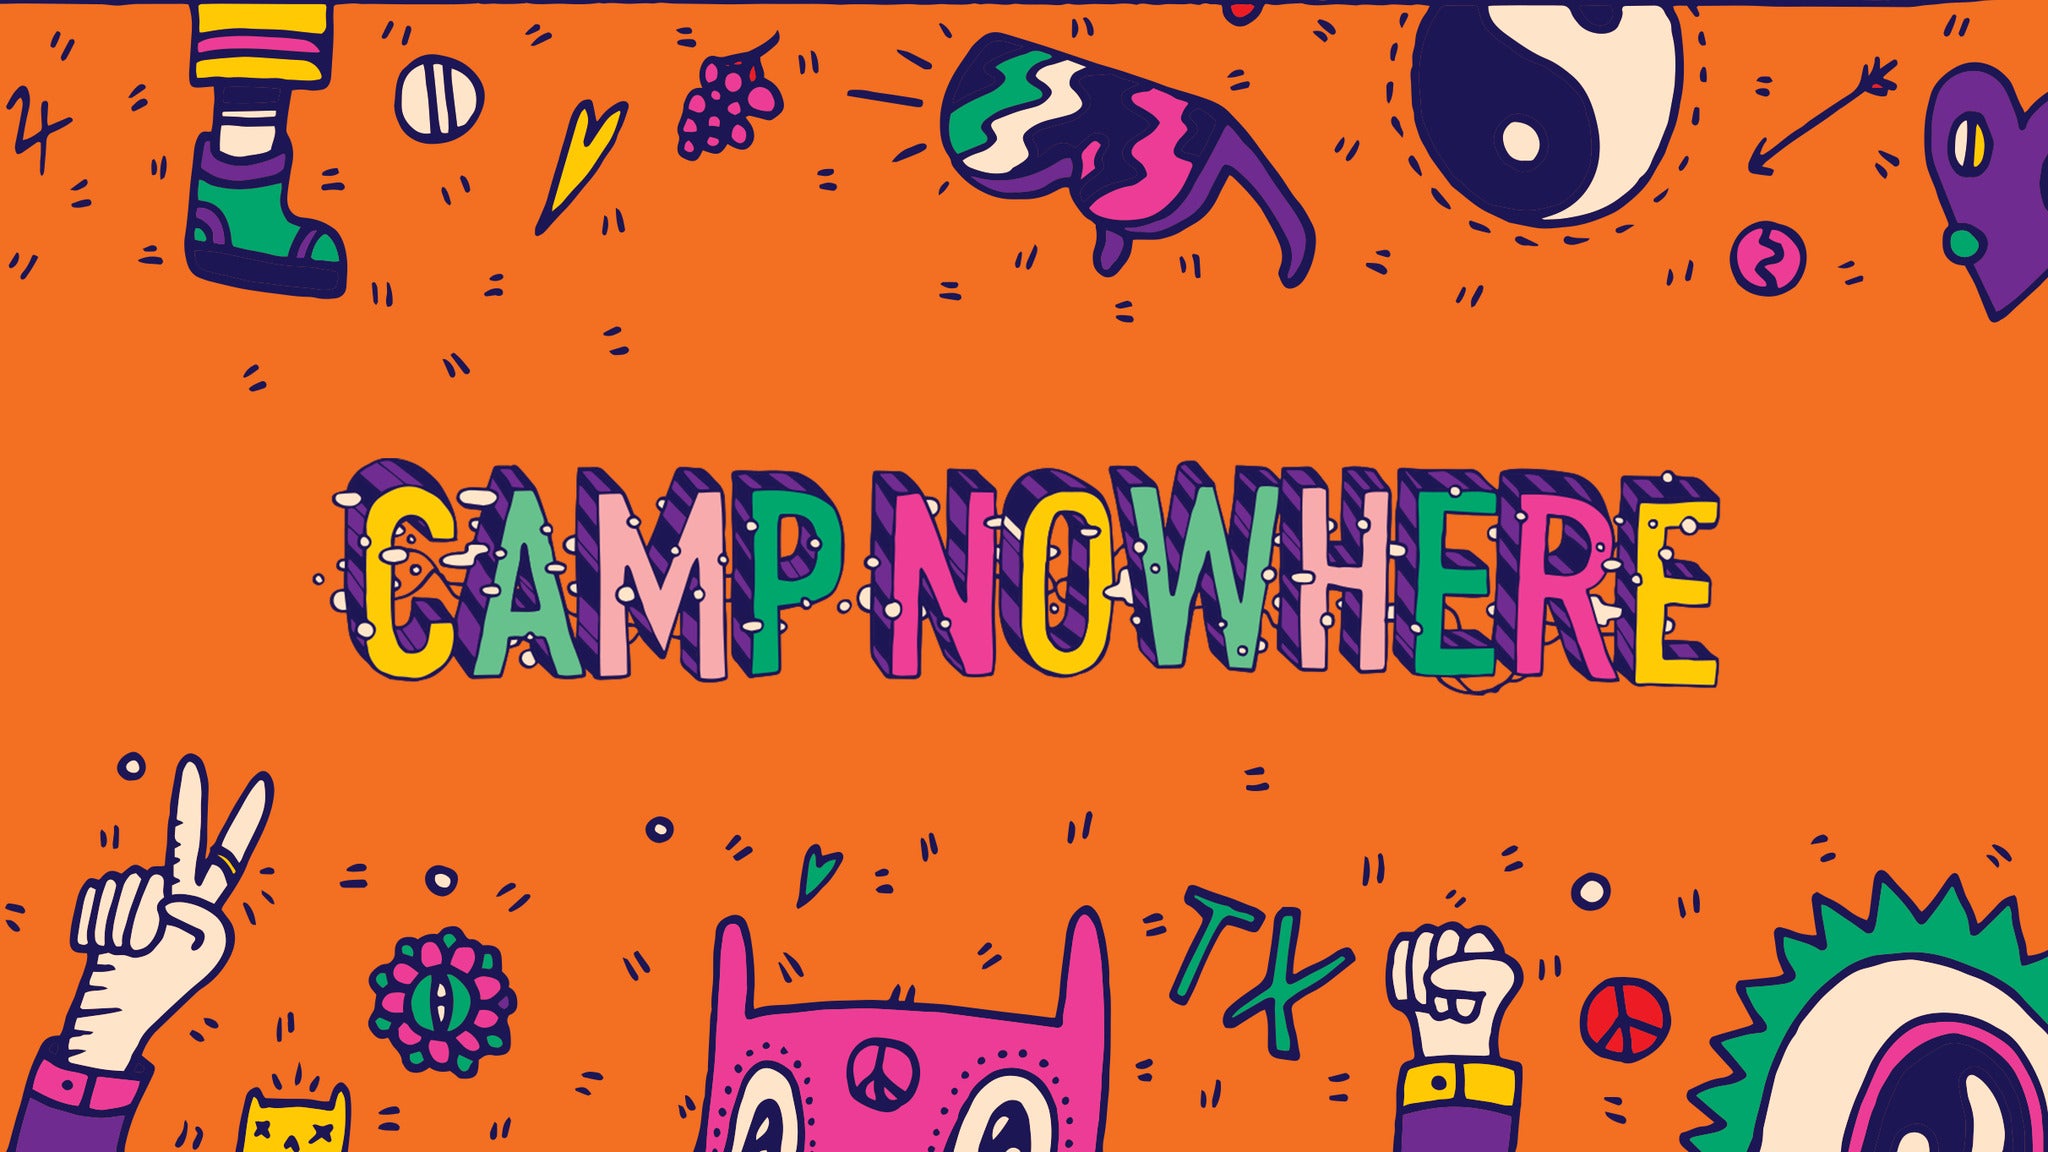 Camp Nowhere 2020 in Dallas promo photo for Live Nation Mobile App presale offer code